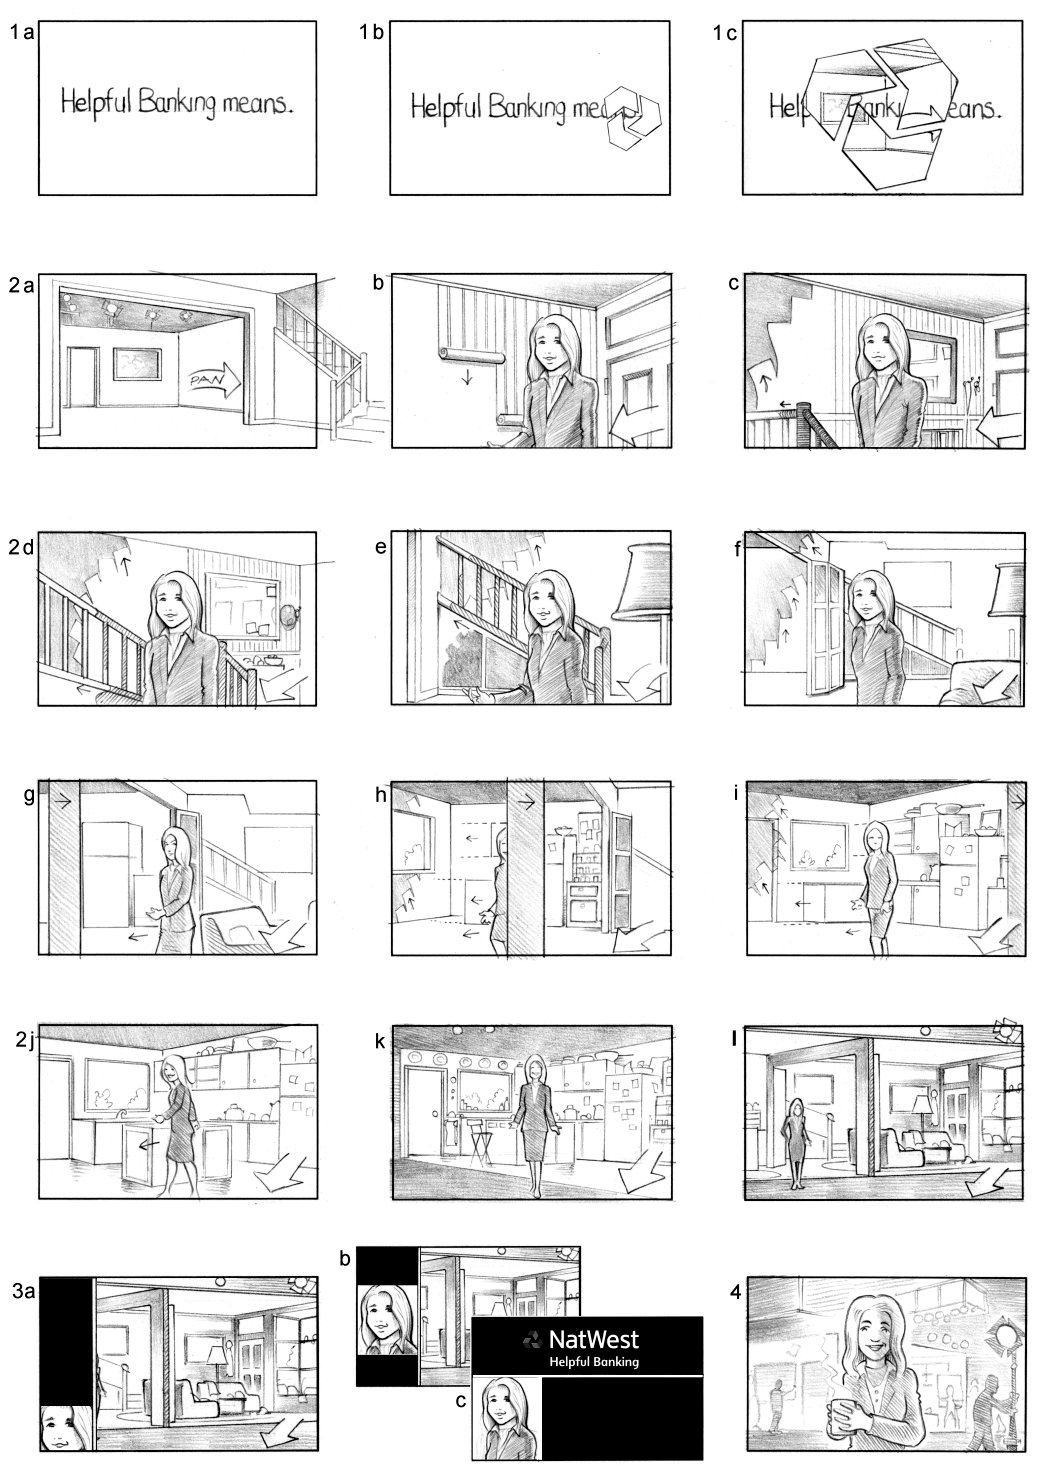 NAT WEST BANK STORYBOARD BY ANDY SPARROW